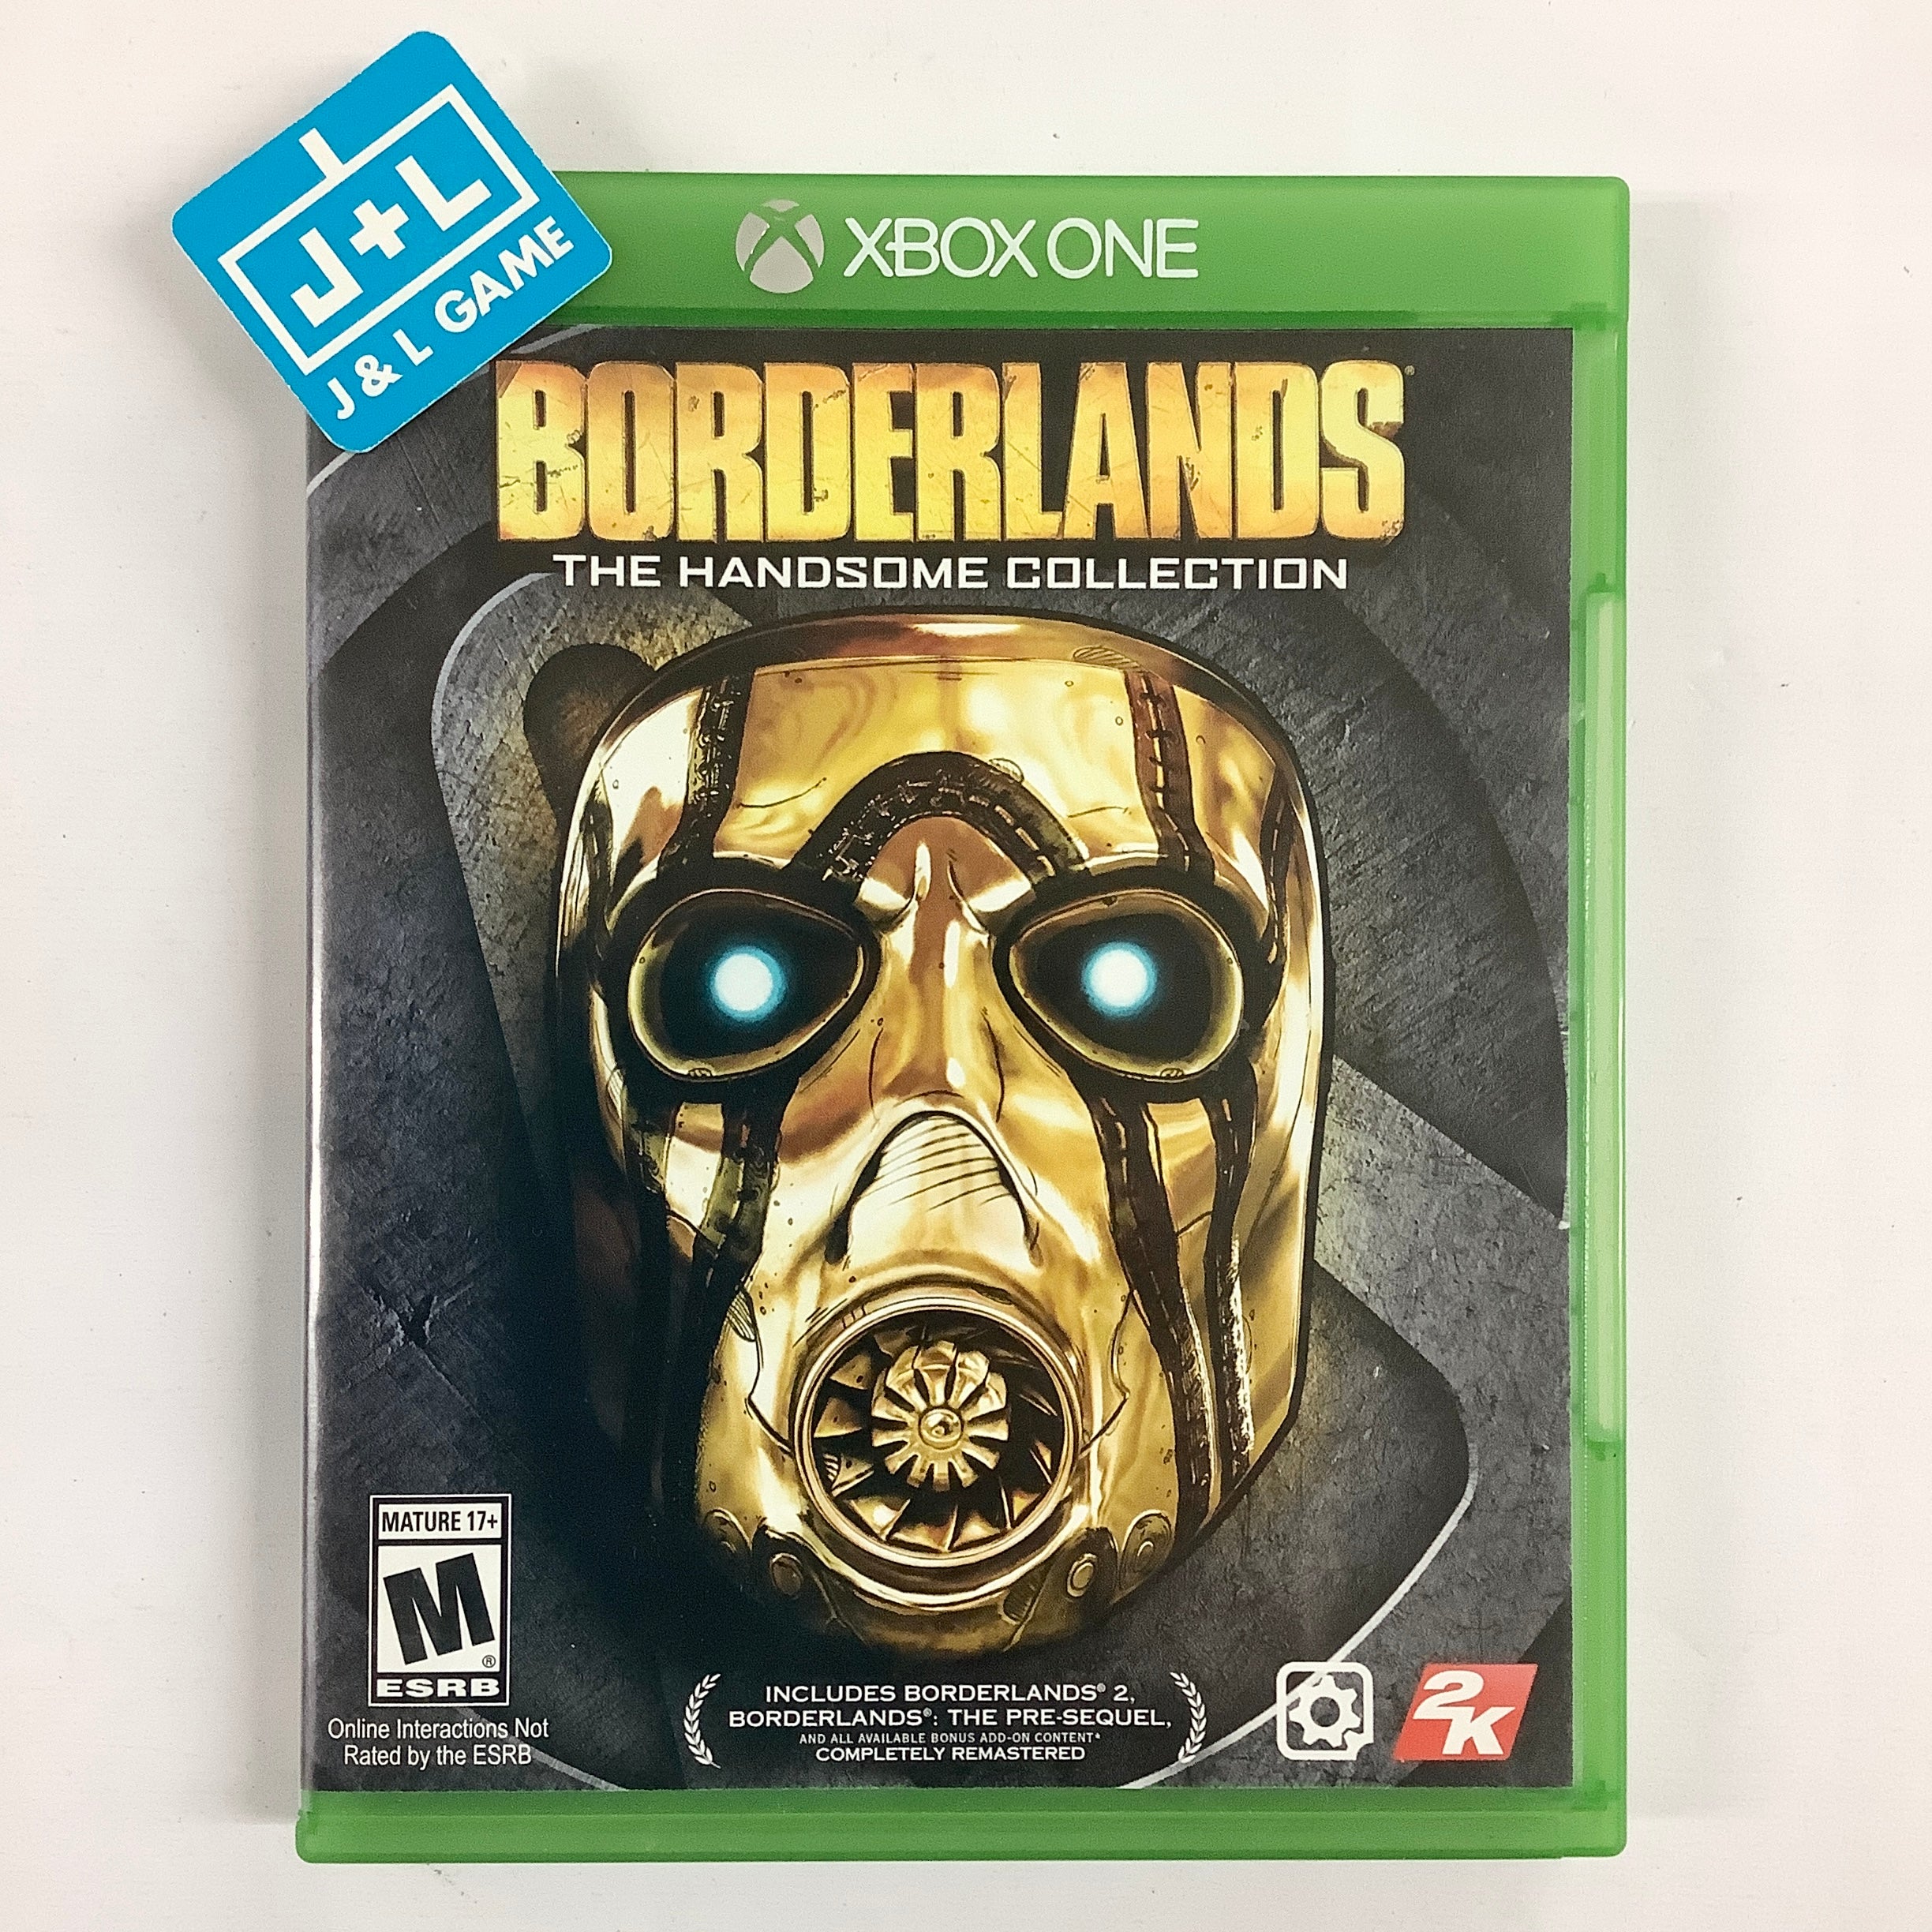 Borderlands: The Handsome Collection - (XB1) Xbox One [Pre-Owned] Video Games 2K Games   